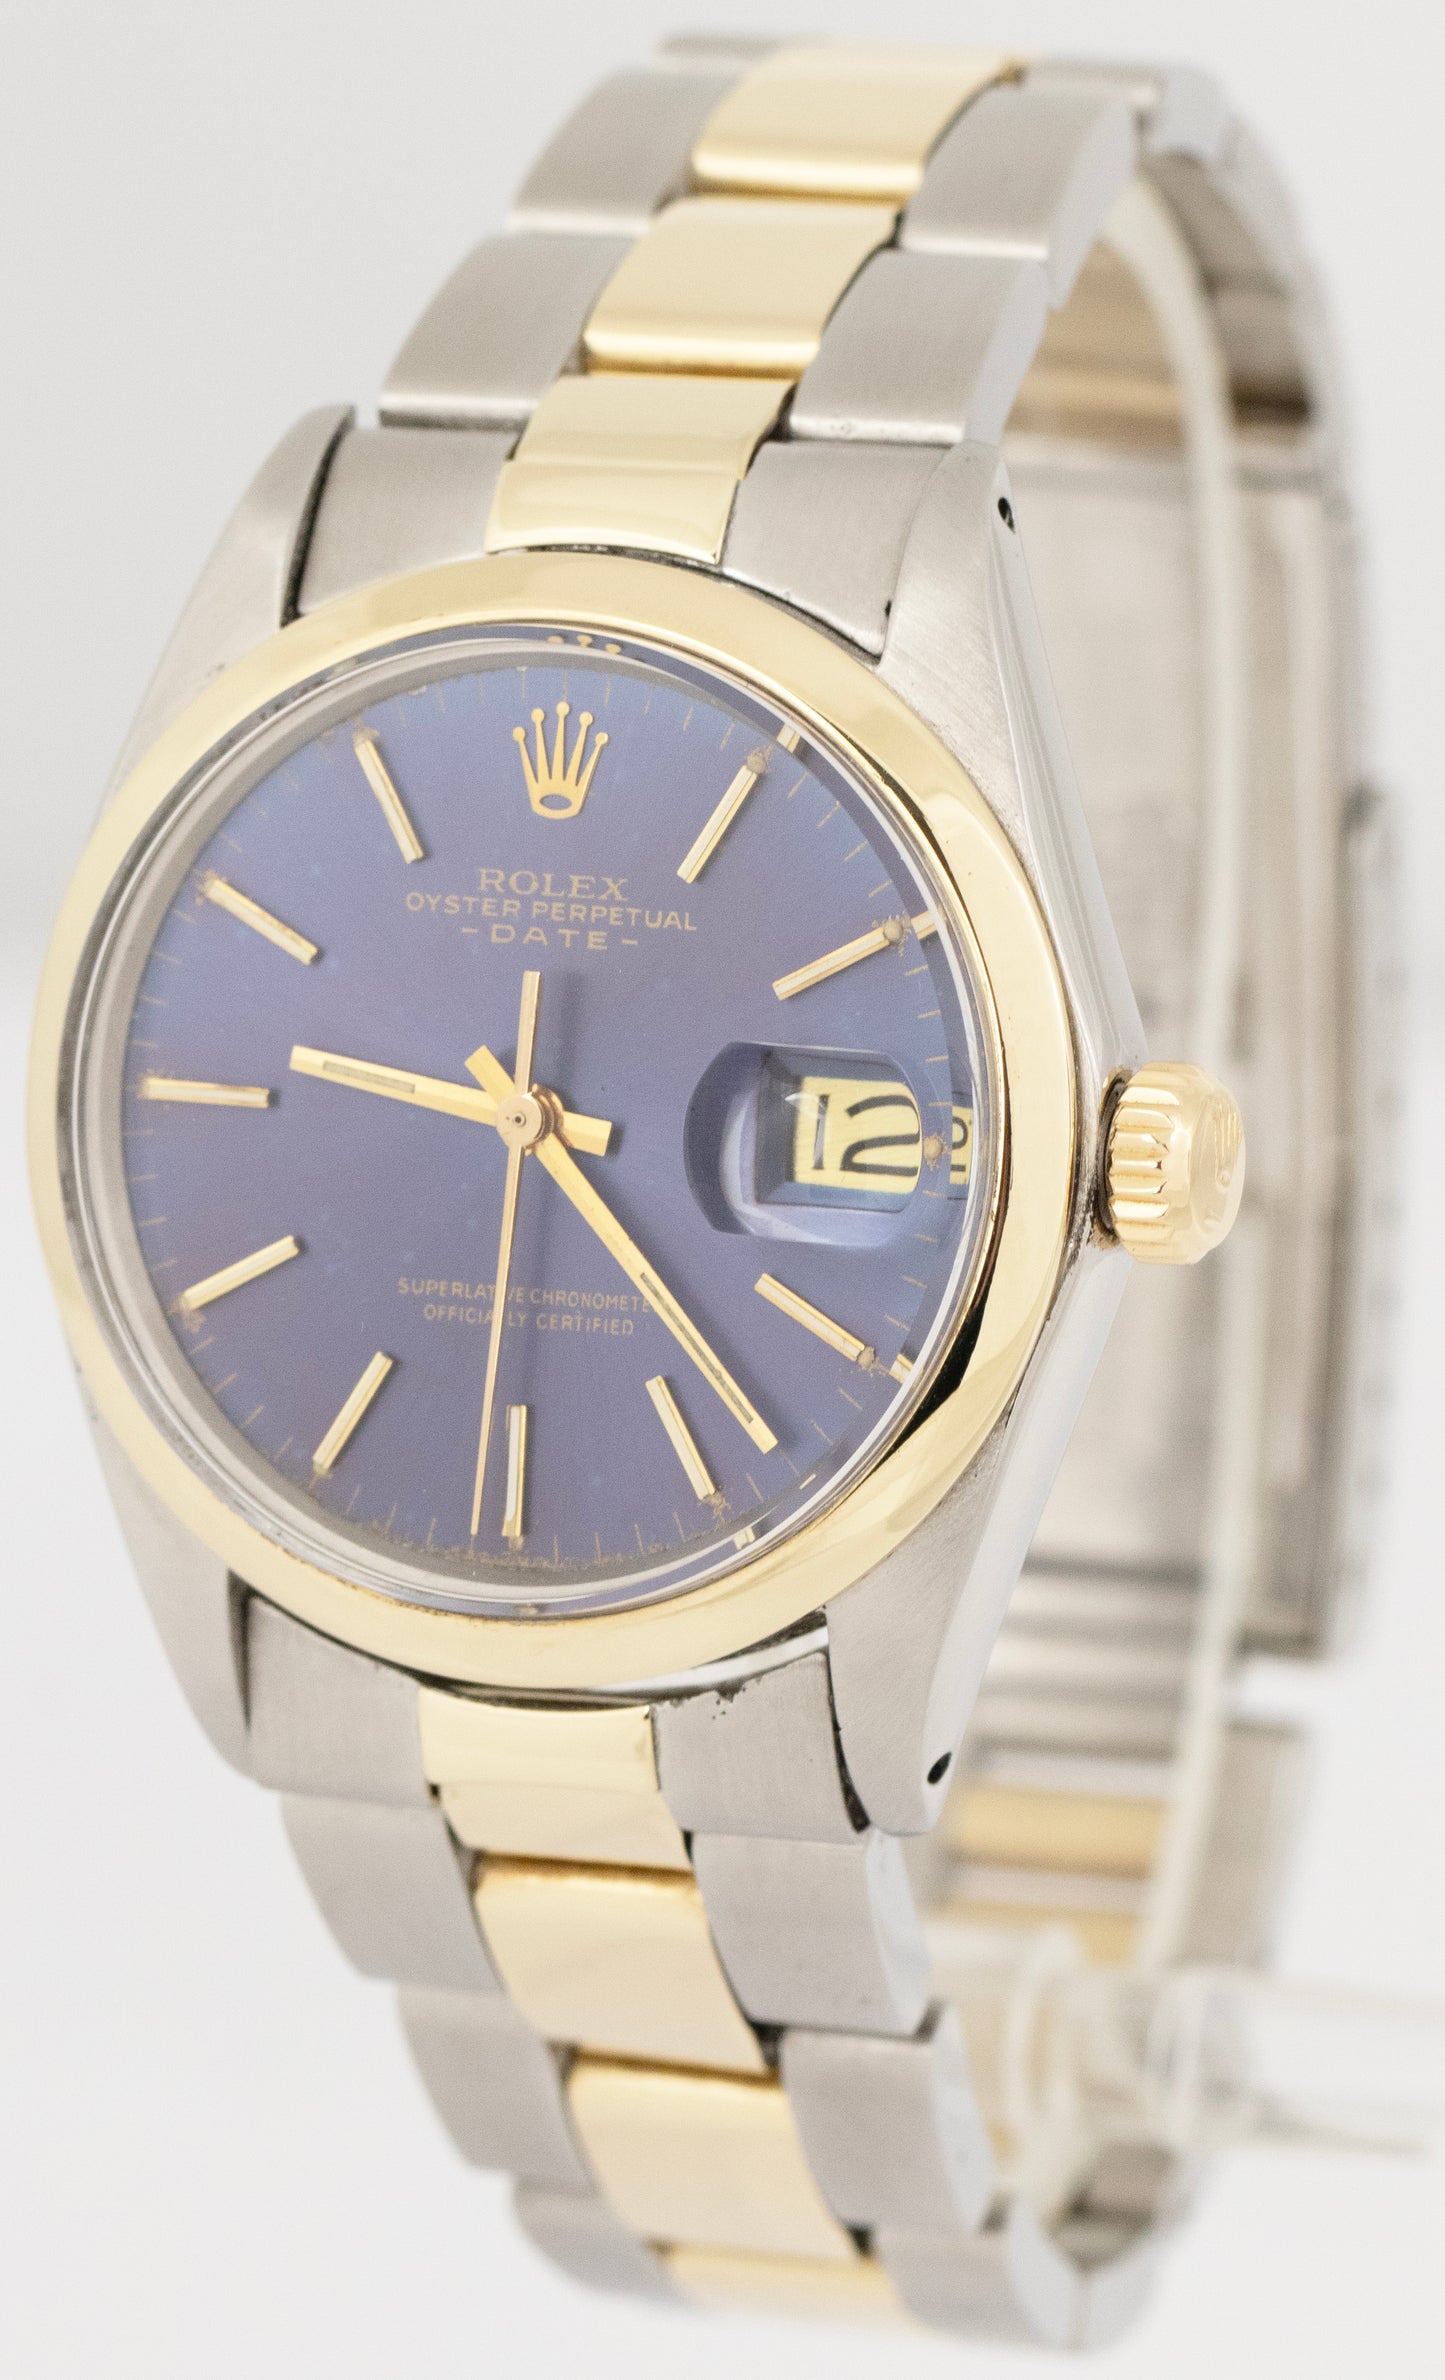 1960 Rolex Oyster Perpetual Date Blue 34mm 18K Gold Steel Oyster Watch 1500